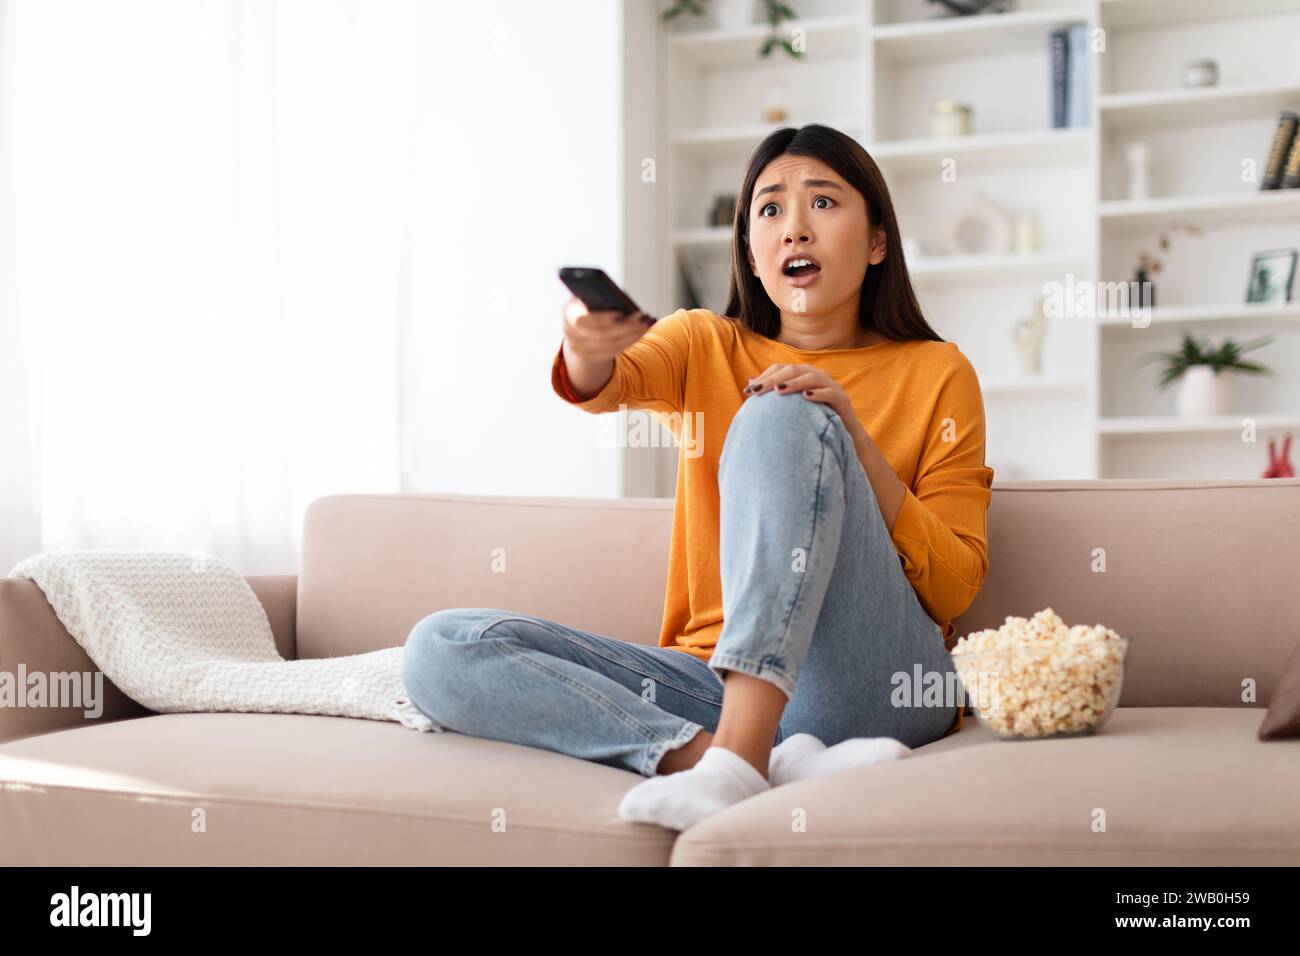 Shocked millennial asian woman watching TV at home Stock Photo